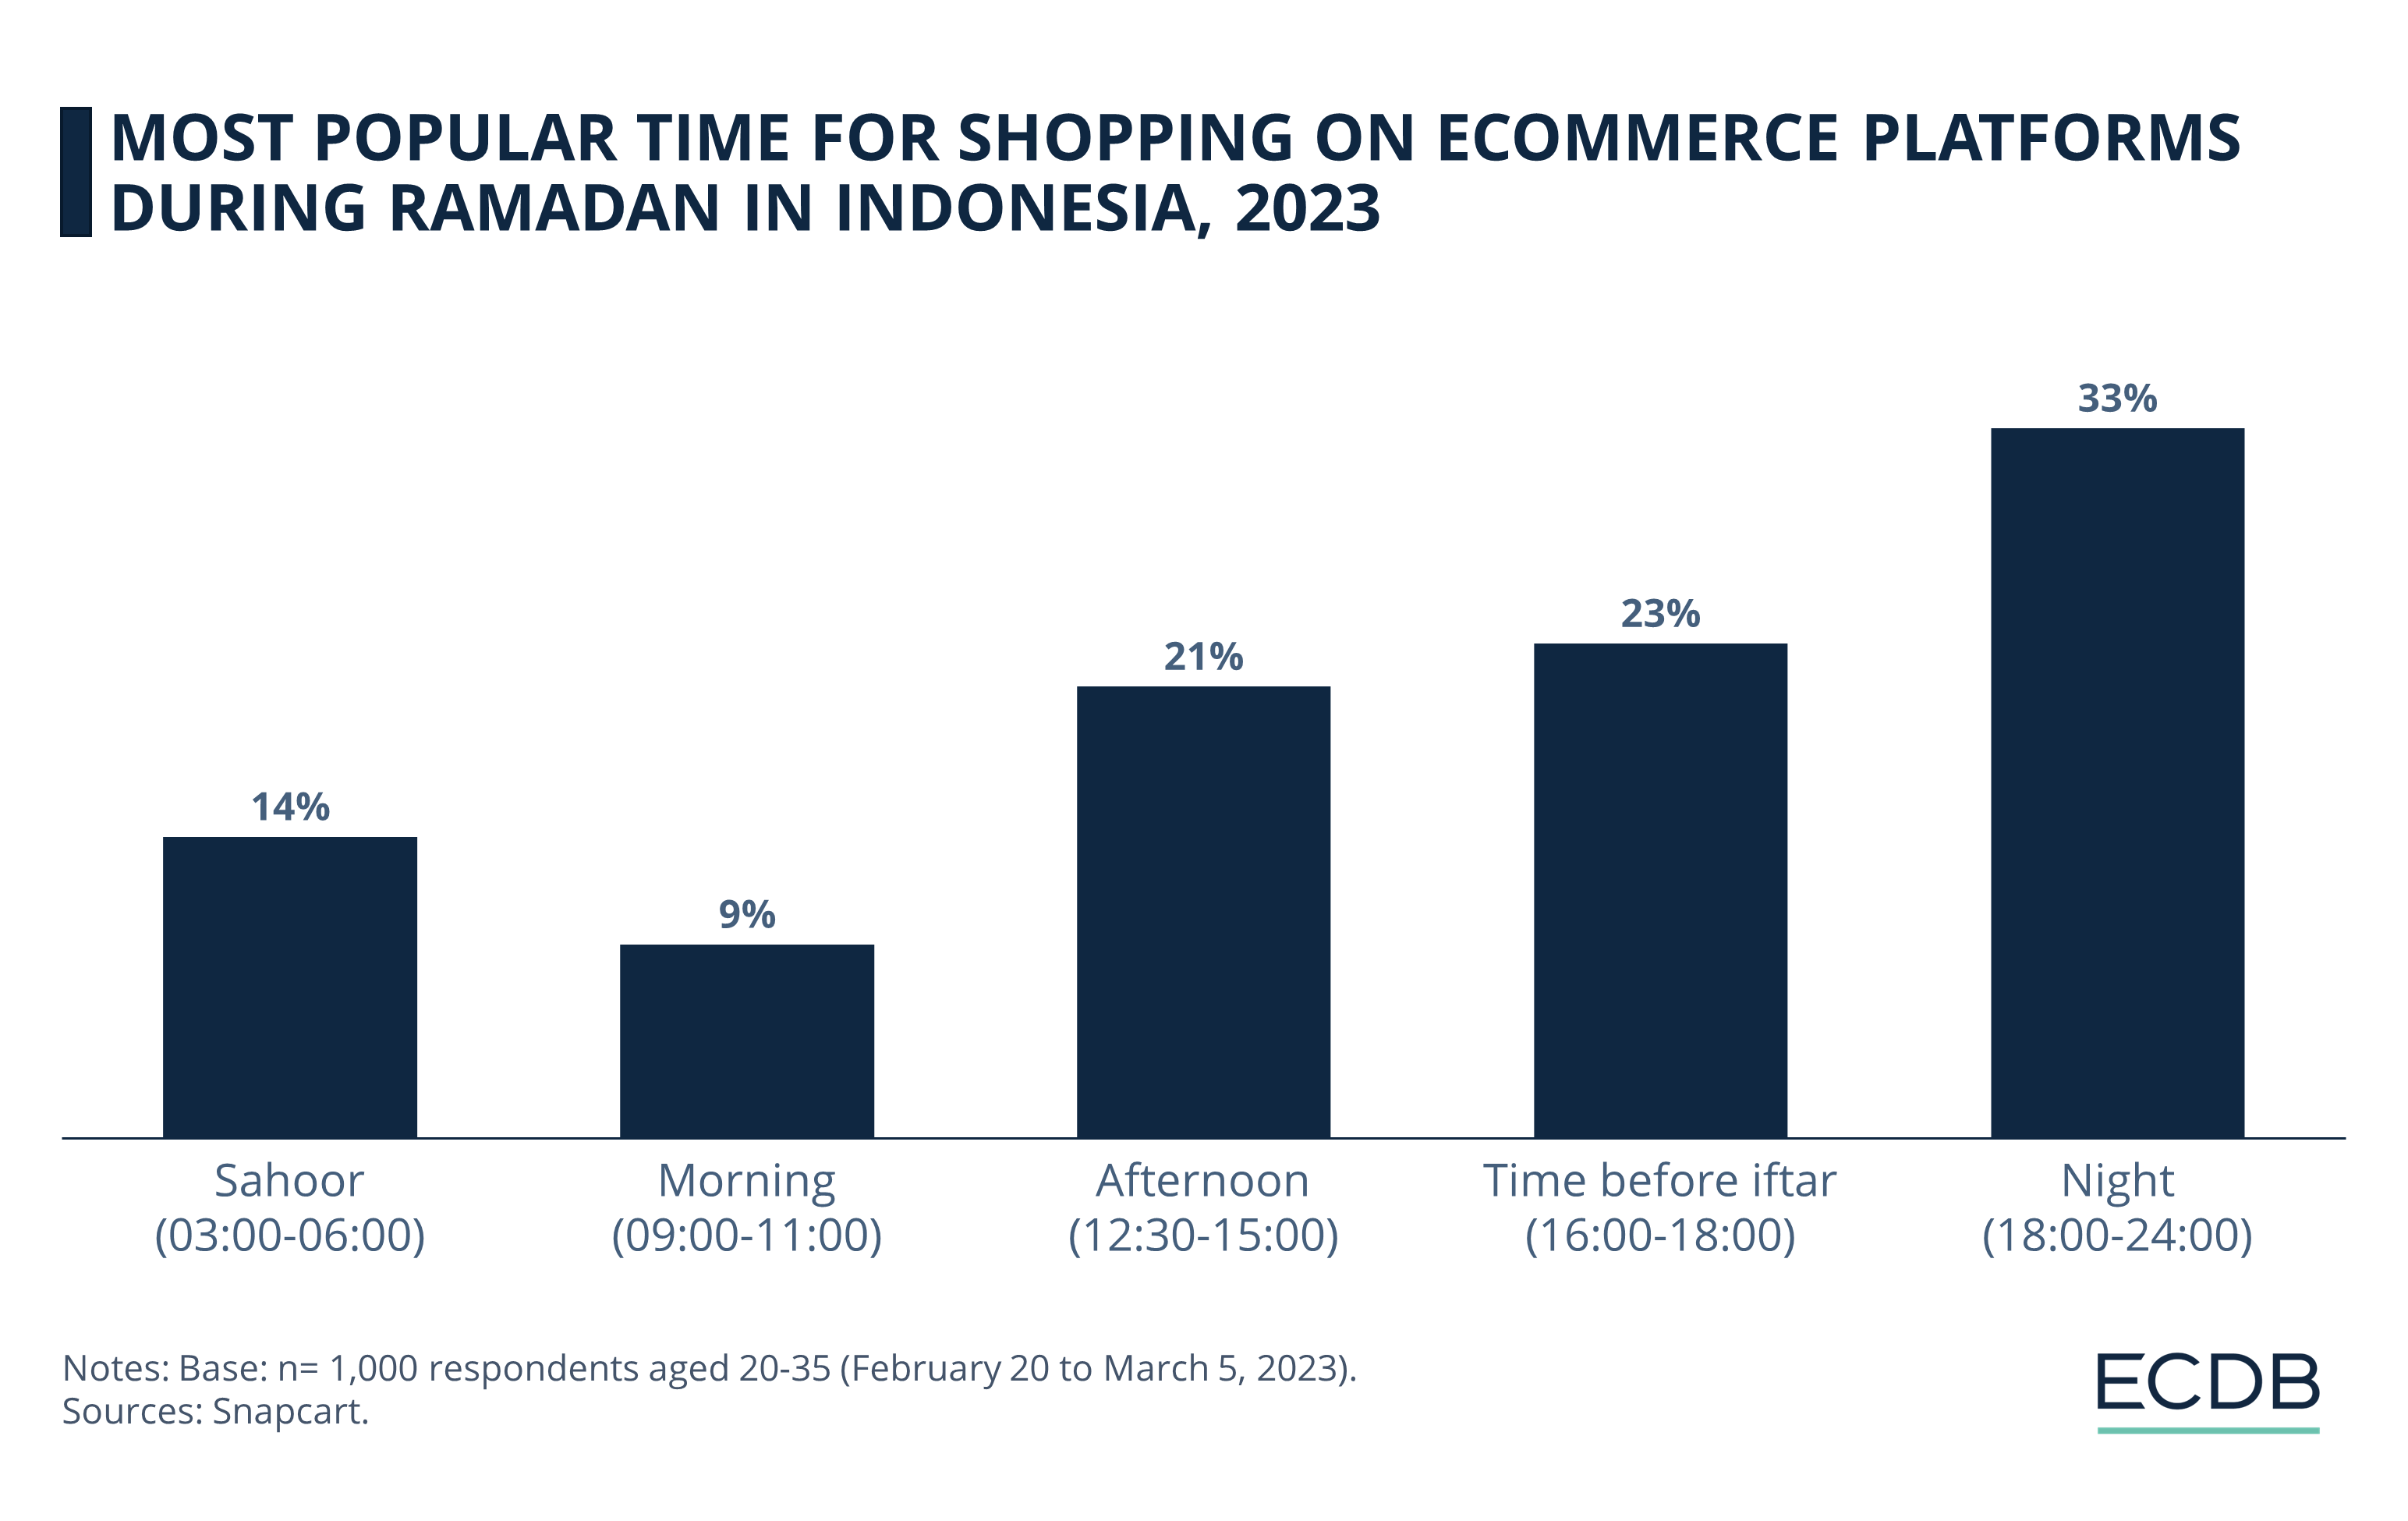 Most Popular Time for Shopping on eCommerce Platforms During Ramadan in Indonesia, 2023